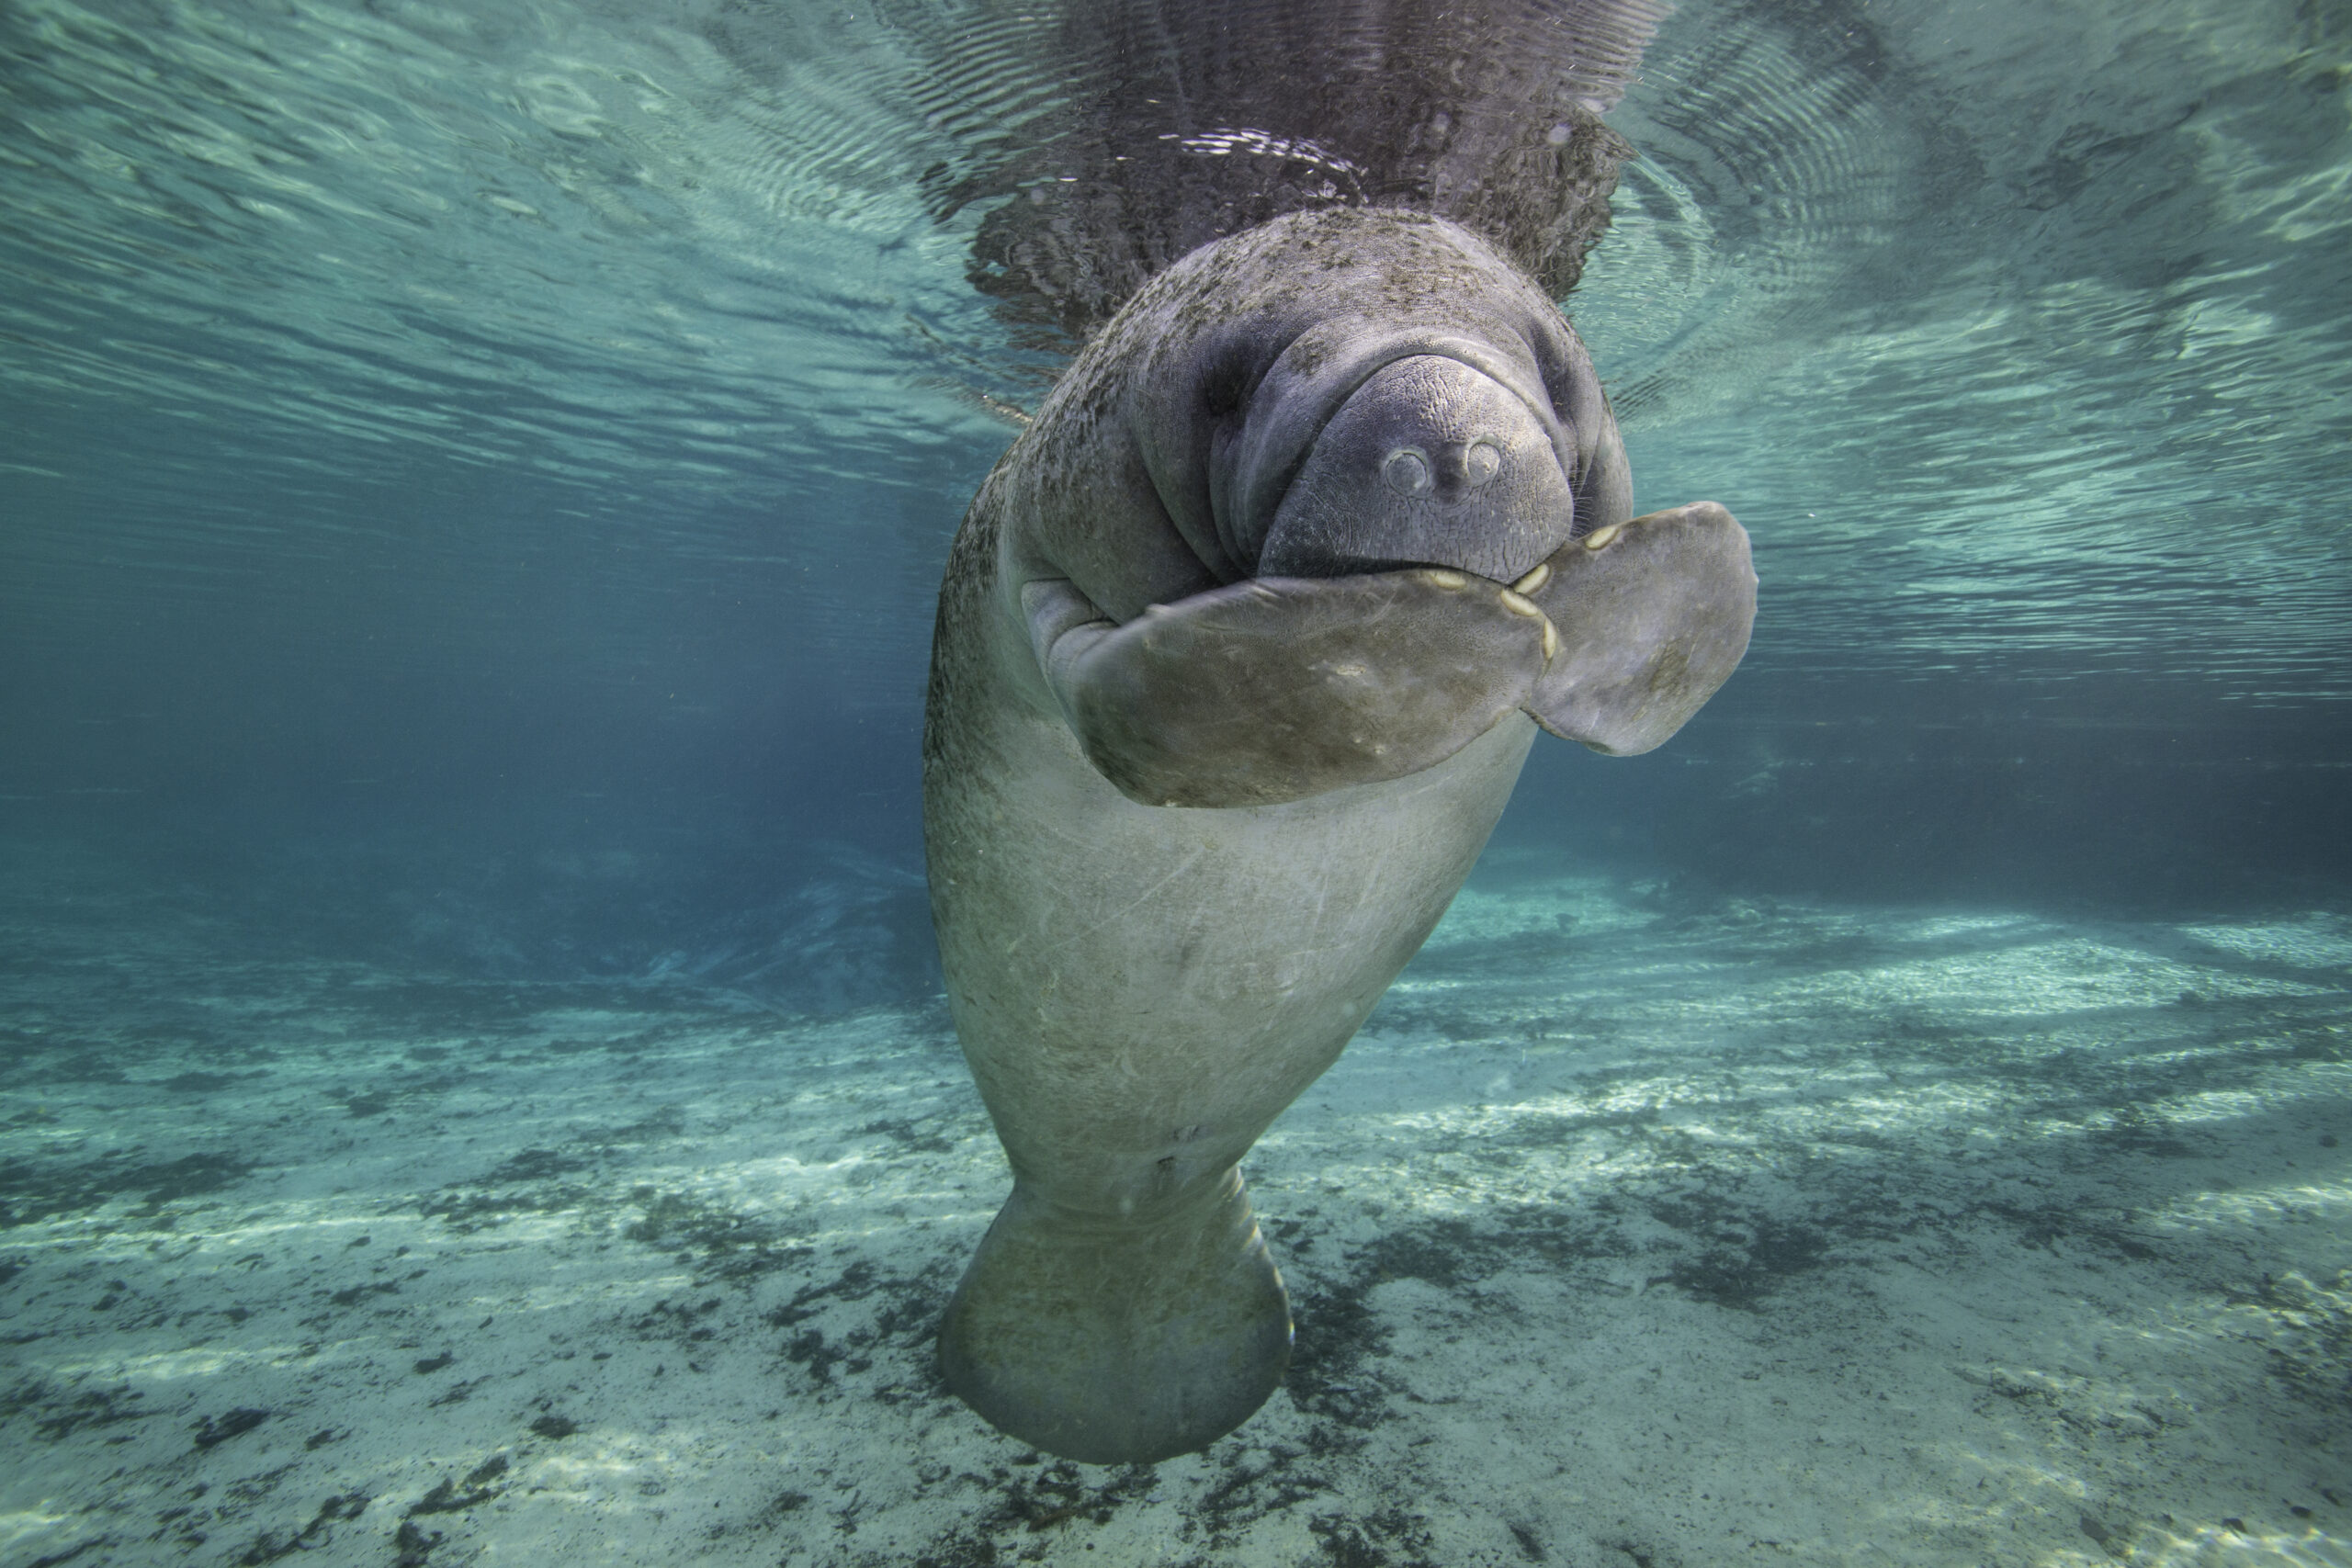 A young manatee has flippers in front of its mouth making it look like surprise or shy.